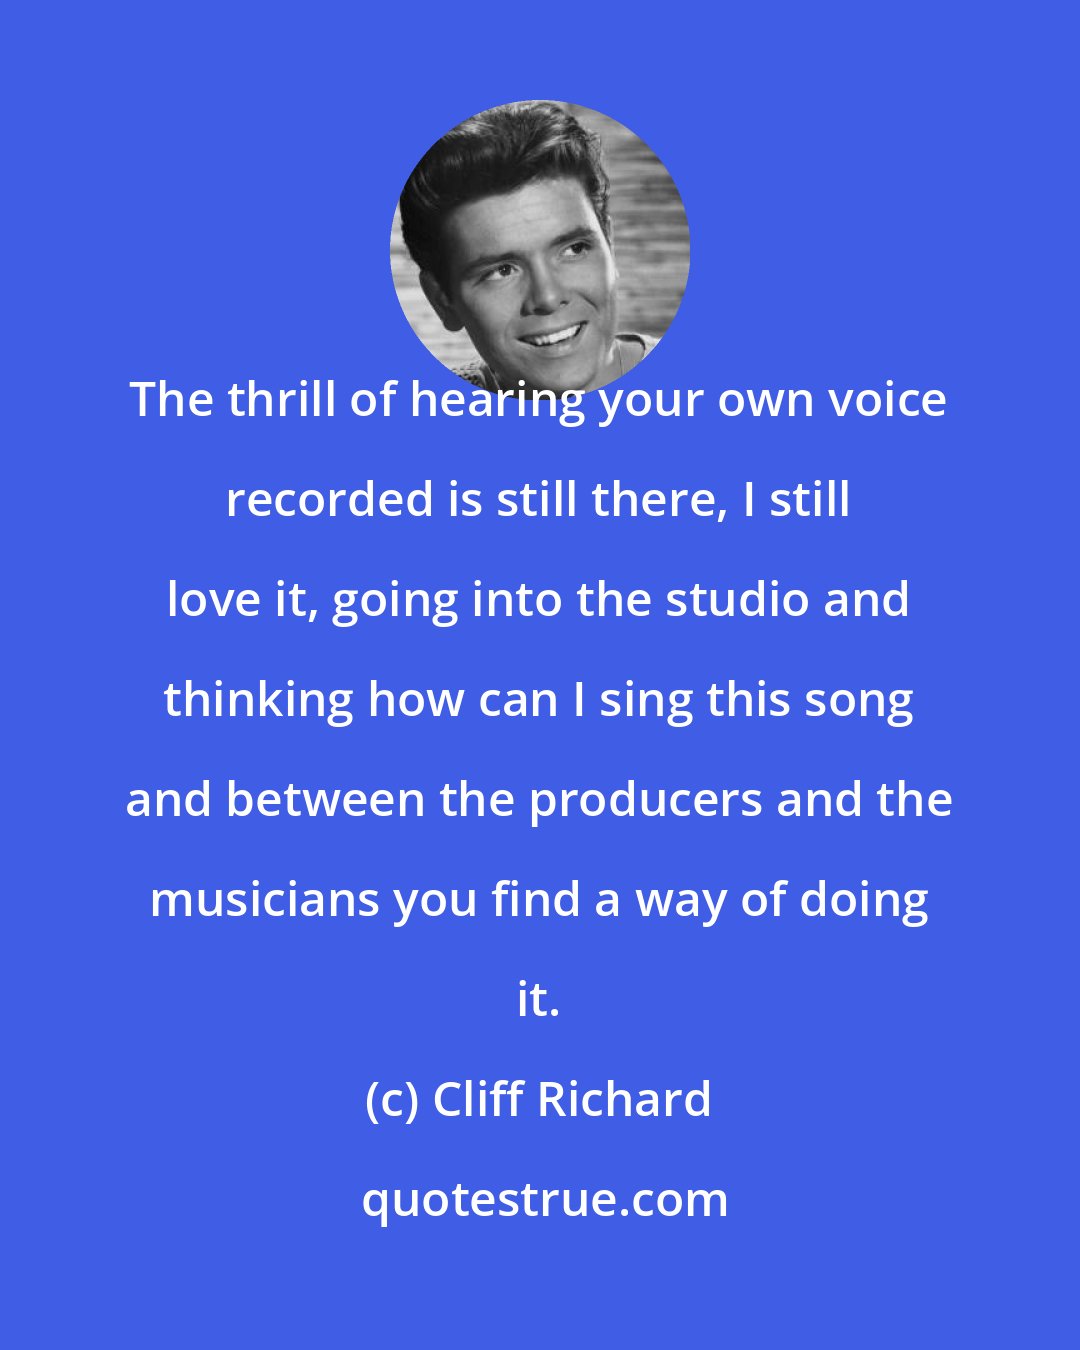 Cliff Richard: The thrill of hearing your own voice recorded is still there, I still love it, going into the studio and thinking how can I sing this song and between the producers and the musicians you find a way of doing it.